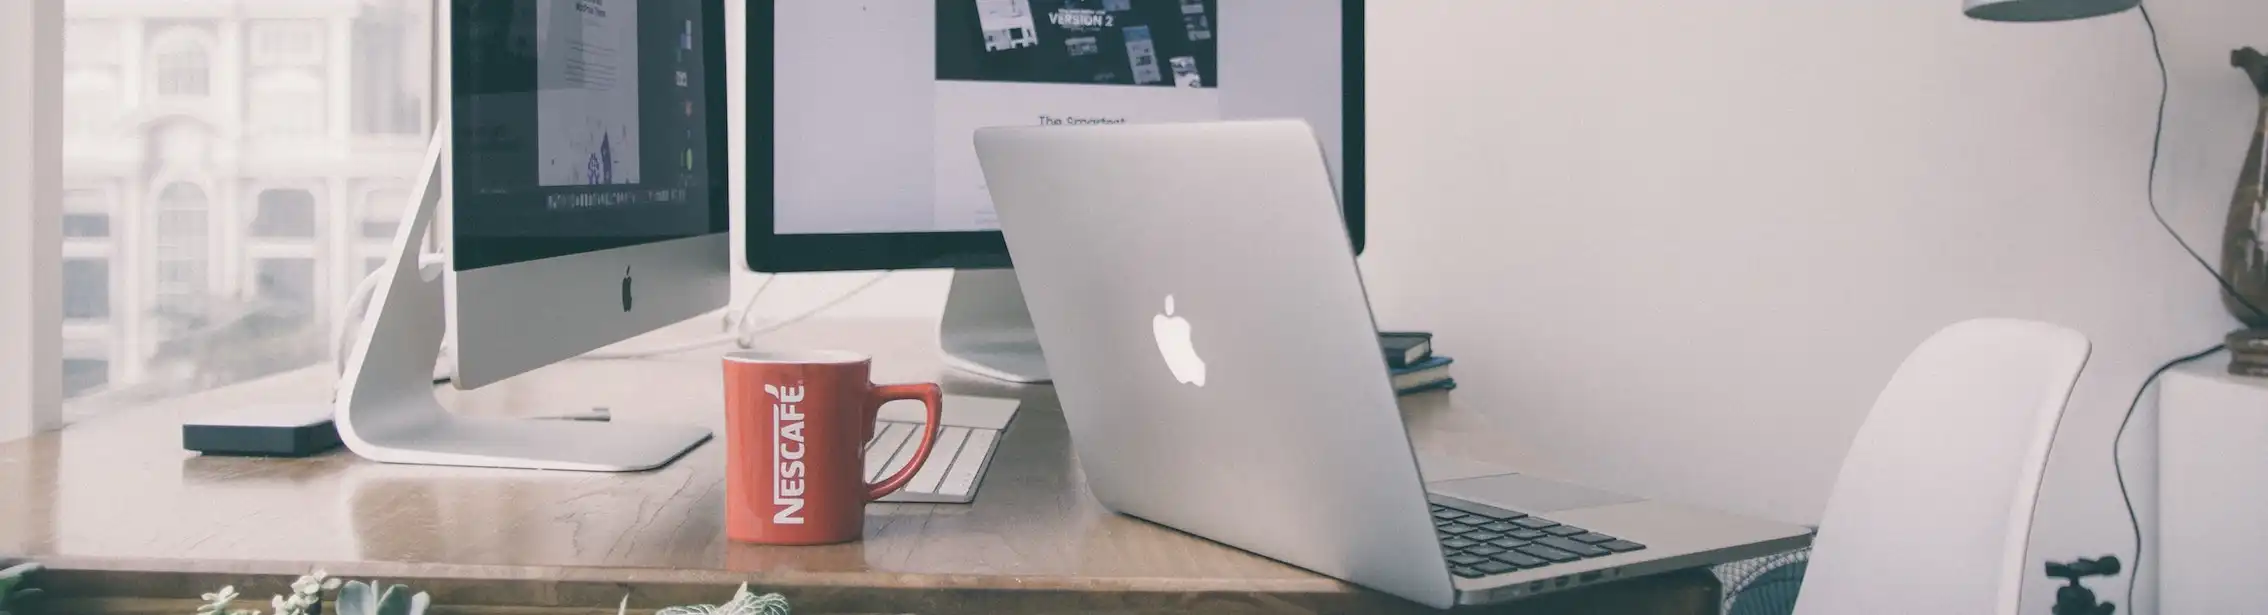 Macbook With Two Imac on Top of Table and Coffee